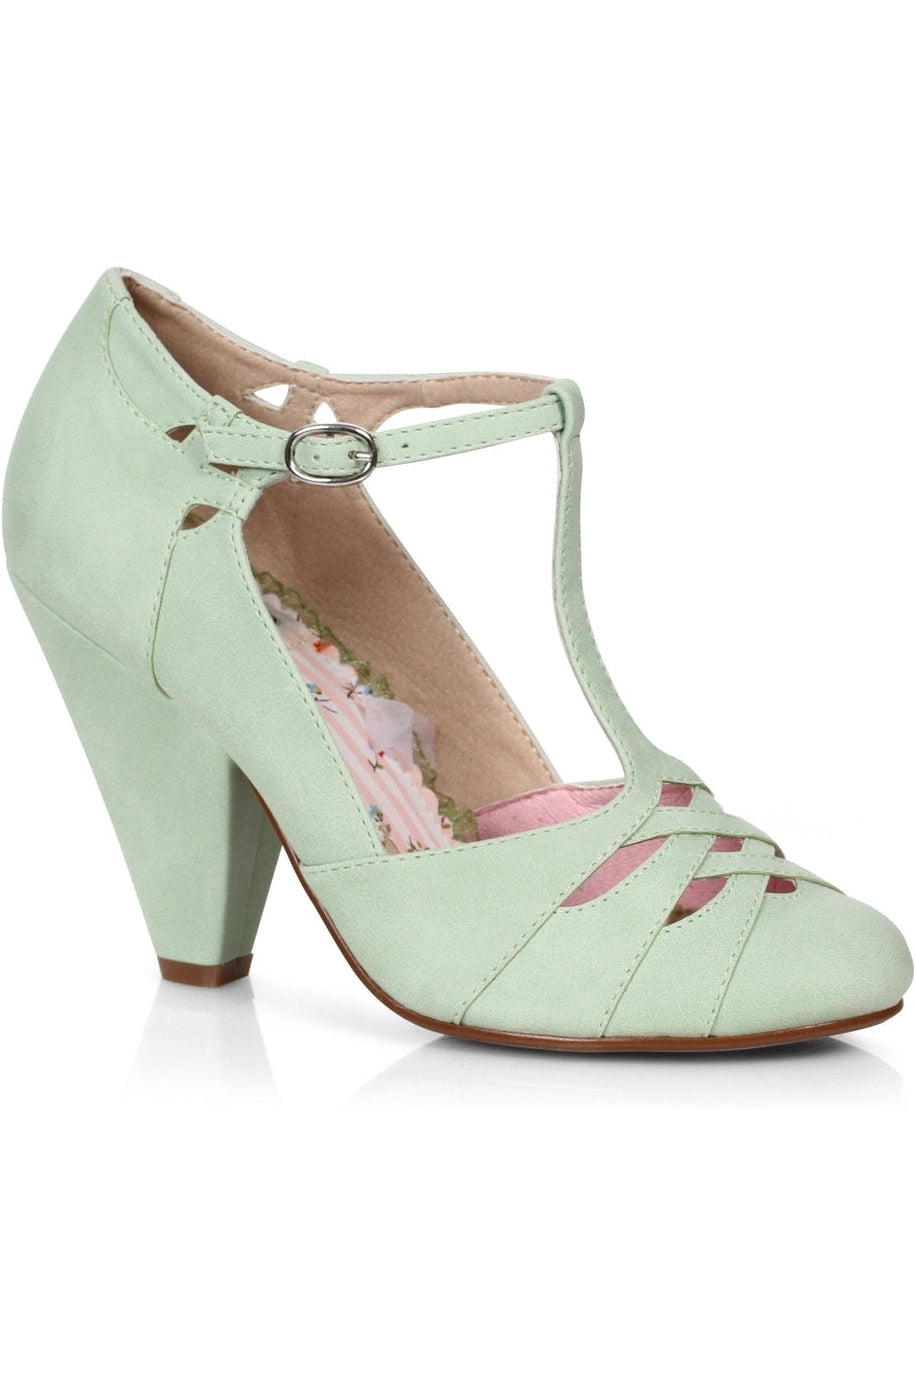 Bettie Page Laura Pump | Green Faux Leather-Pumps-Bettie Page by Ellie-SEXYSHOES.COM